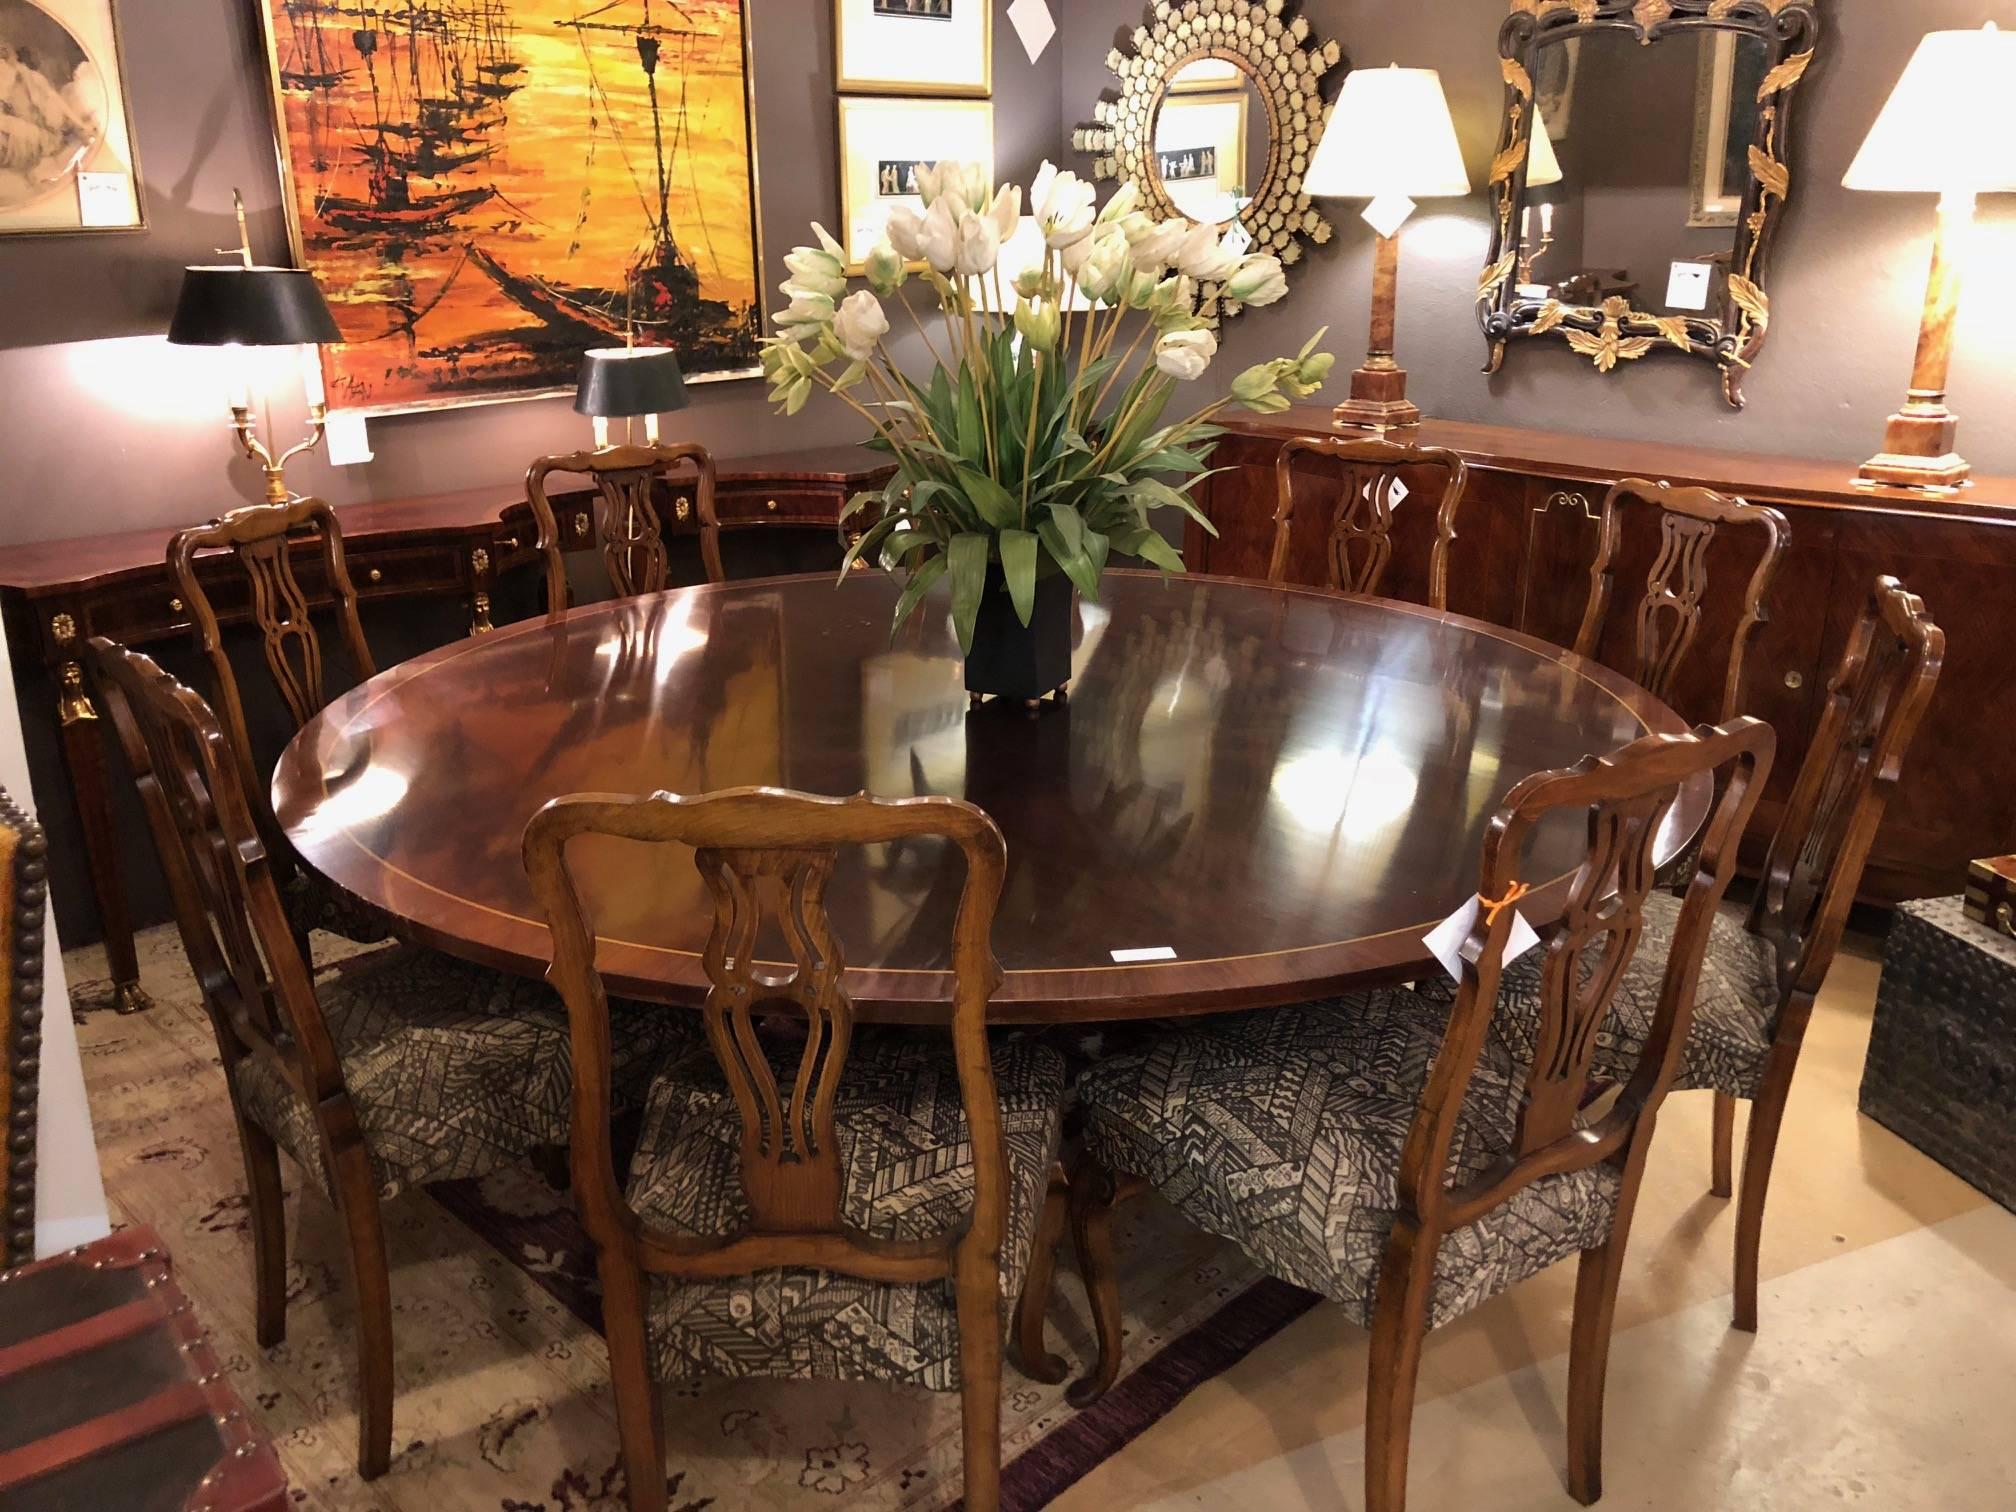 A custom quality palatial Georgian style banded flame mahogany circular dining table. This seven foot circular dining table has a fine flame mahogany grain with a think crossbanded satinwood edge sitting on scrolled column-form reeded legs.